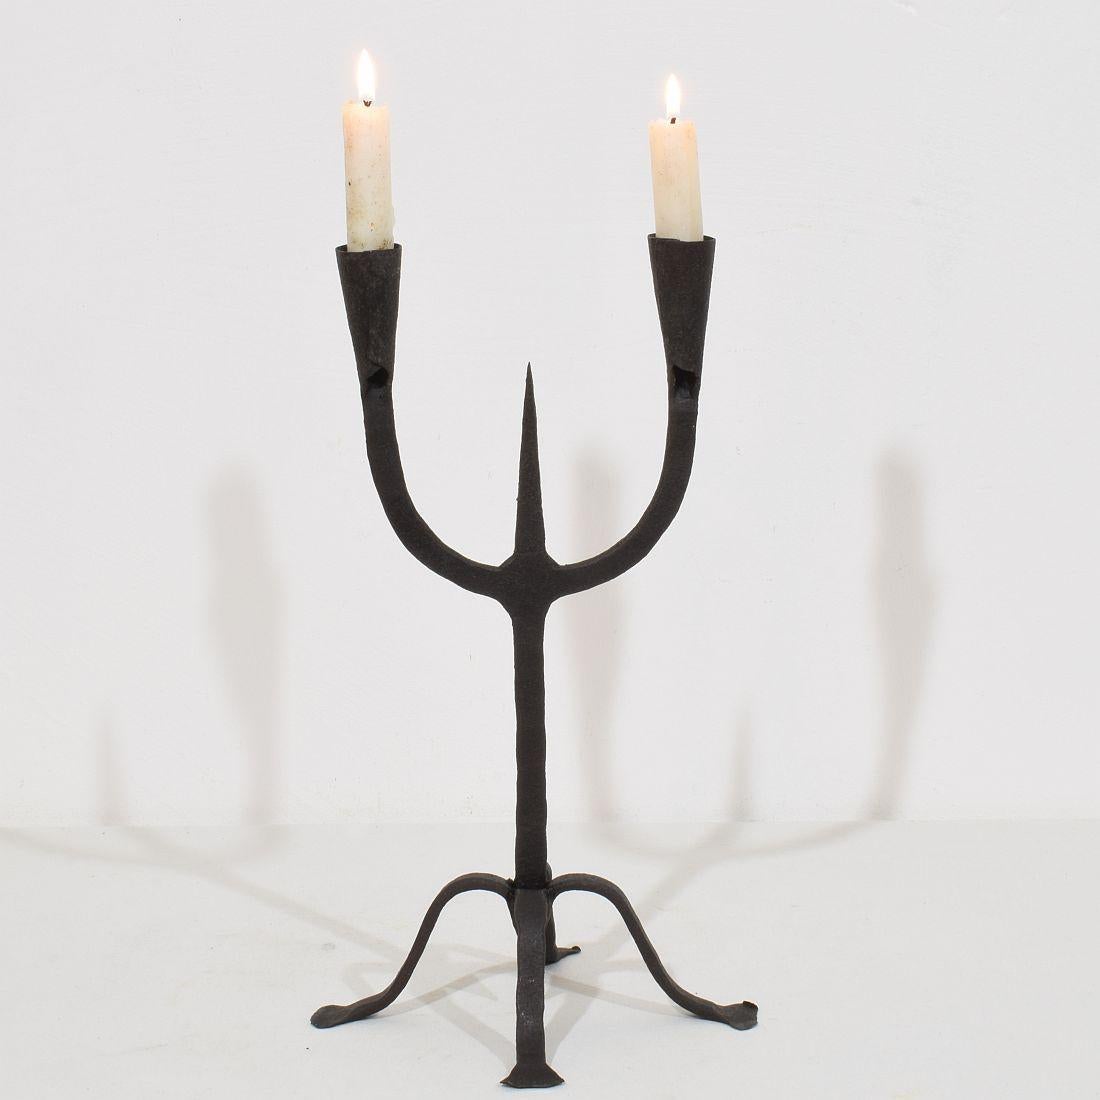 Beautiful 18th-19th century hand forged iron candleholder. A wonderful example of primitive folk art. A perfect balance between utility and aesthetics. 

Southern France, Spain, 18th-19th century. Weathered.